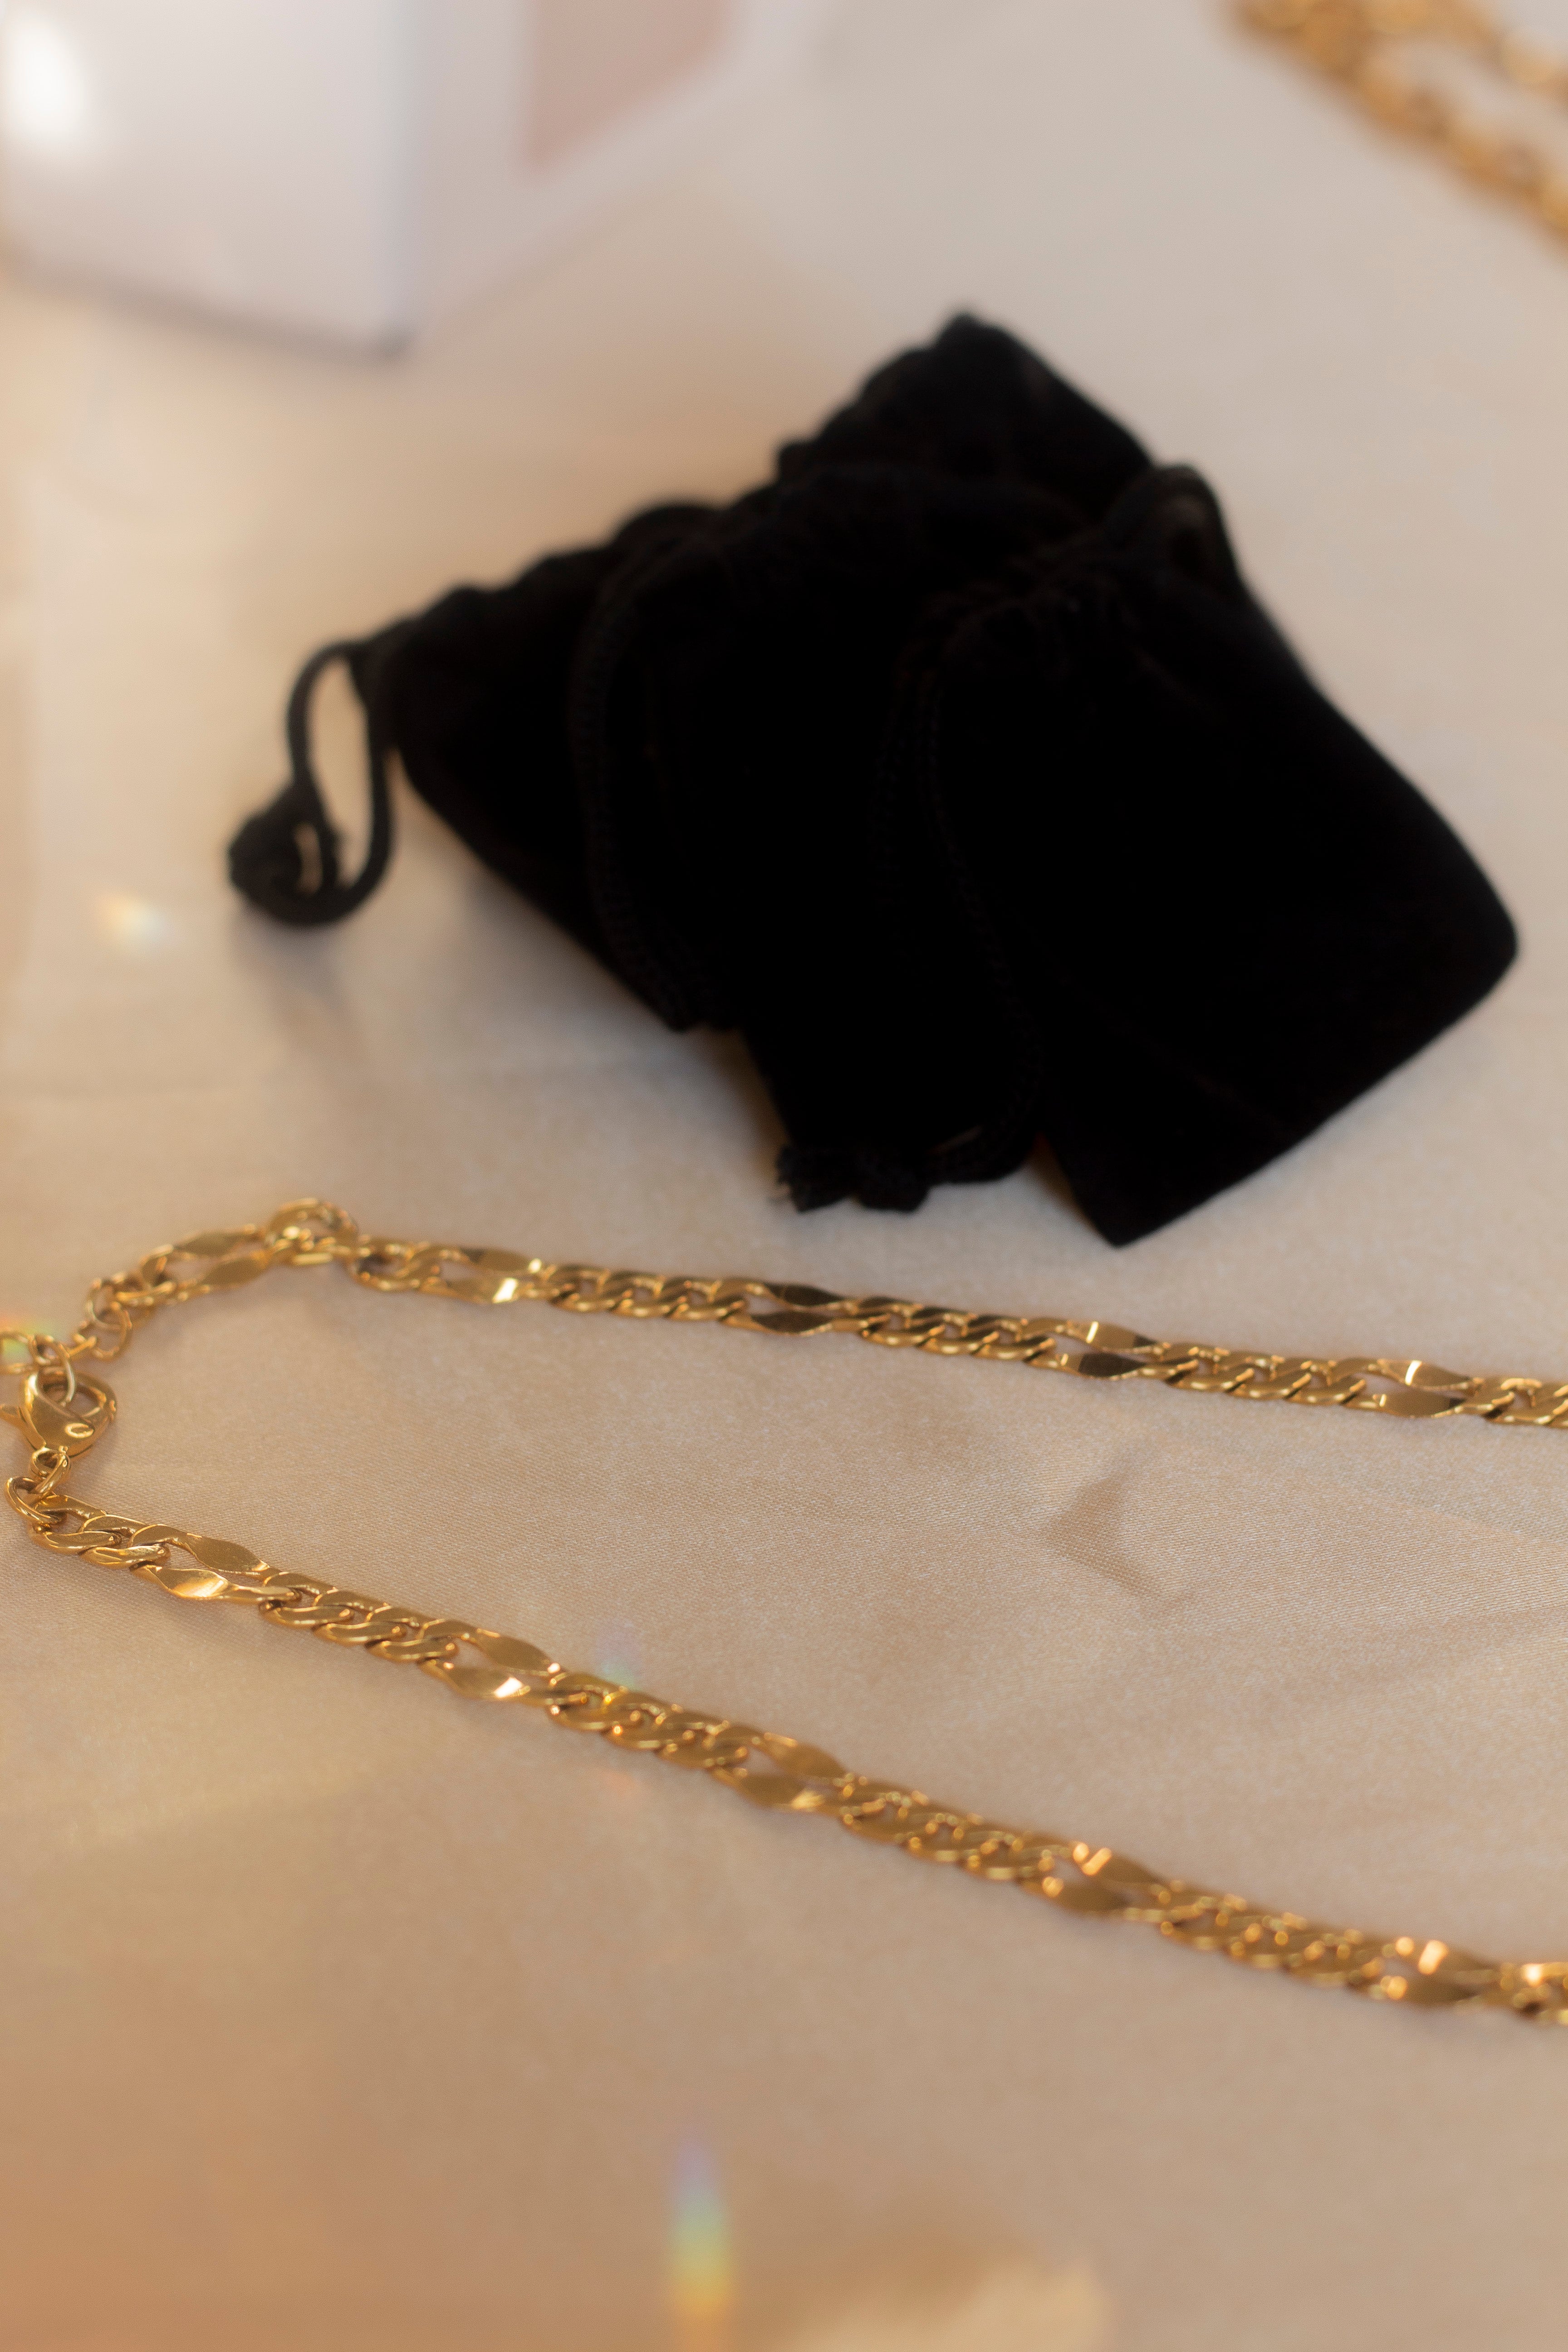 18k gold chain necklace placed on a beige cloth. Ella Figaro Necklace by E's Element.